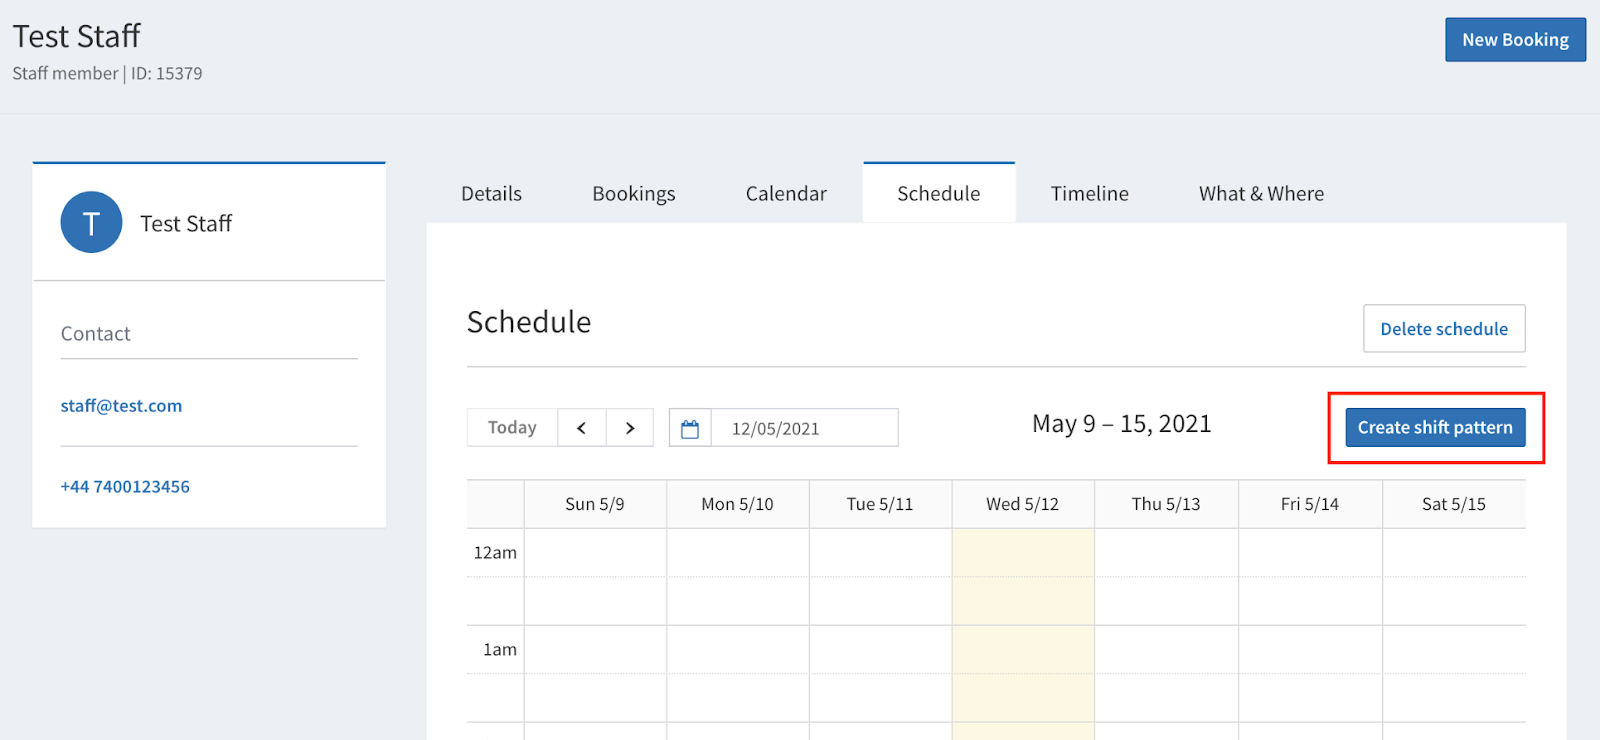 Creating a shift pattern on the staff schedule page